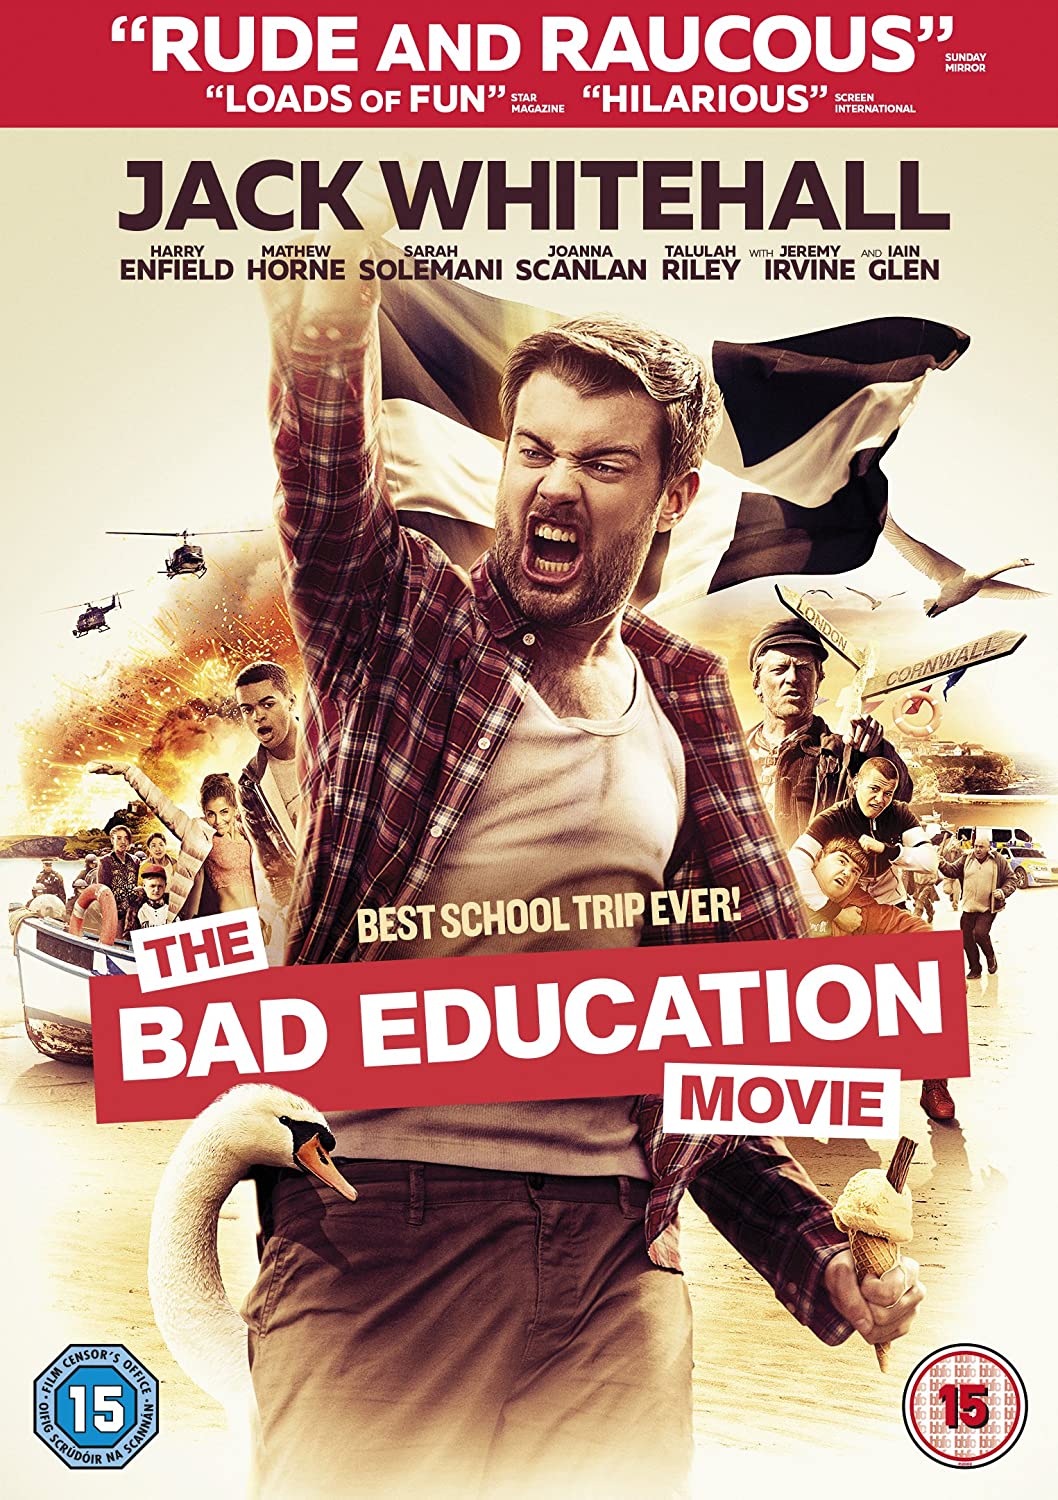 The Bad Education Movie [2017] - Biography [DVD]